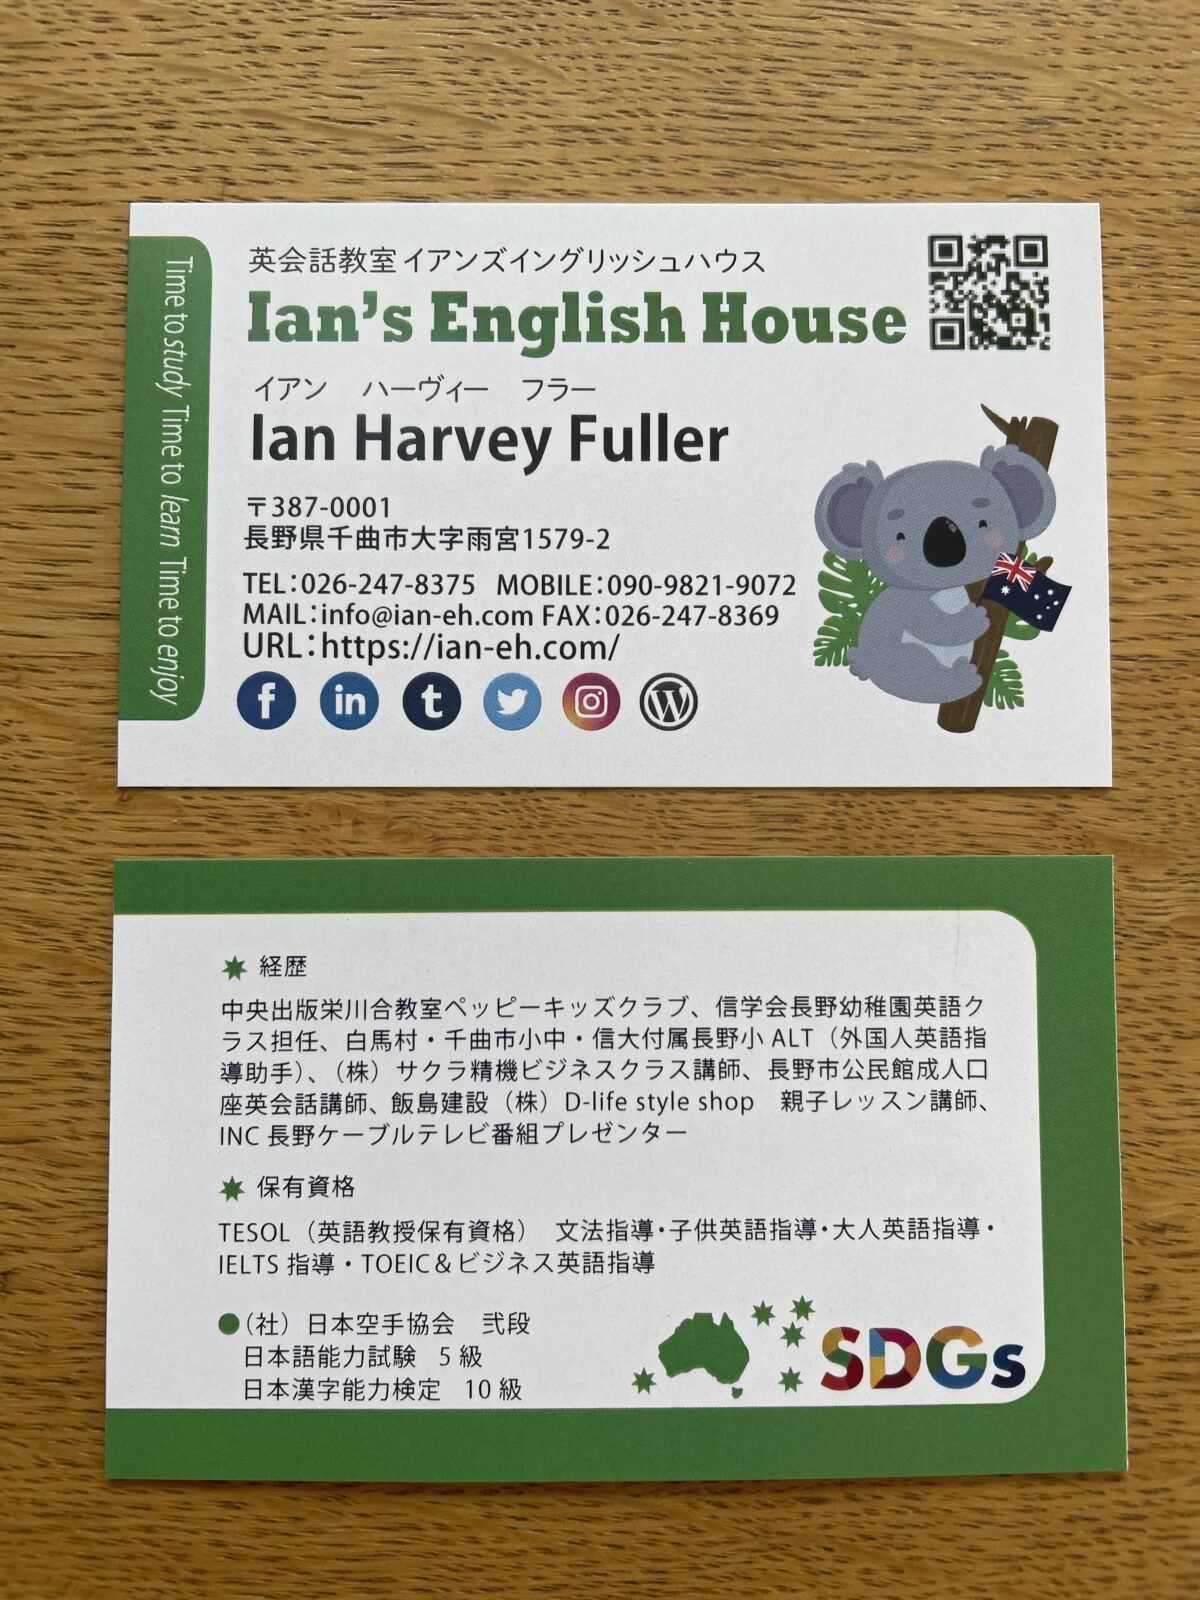 New business cards and flyers